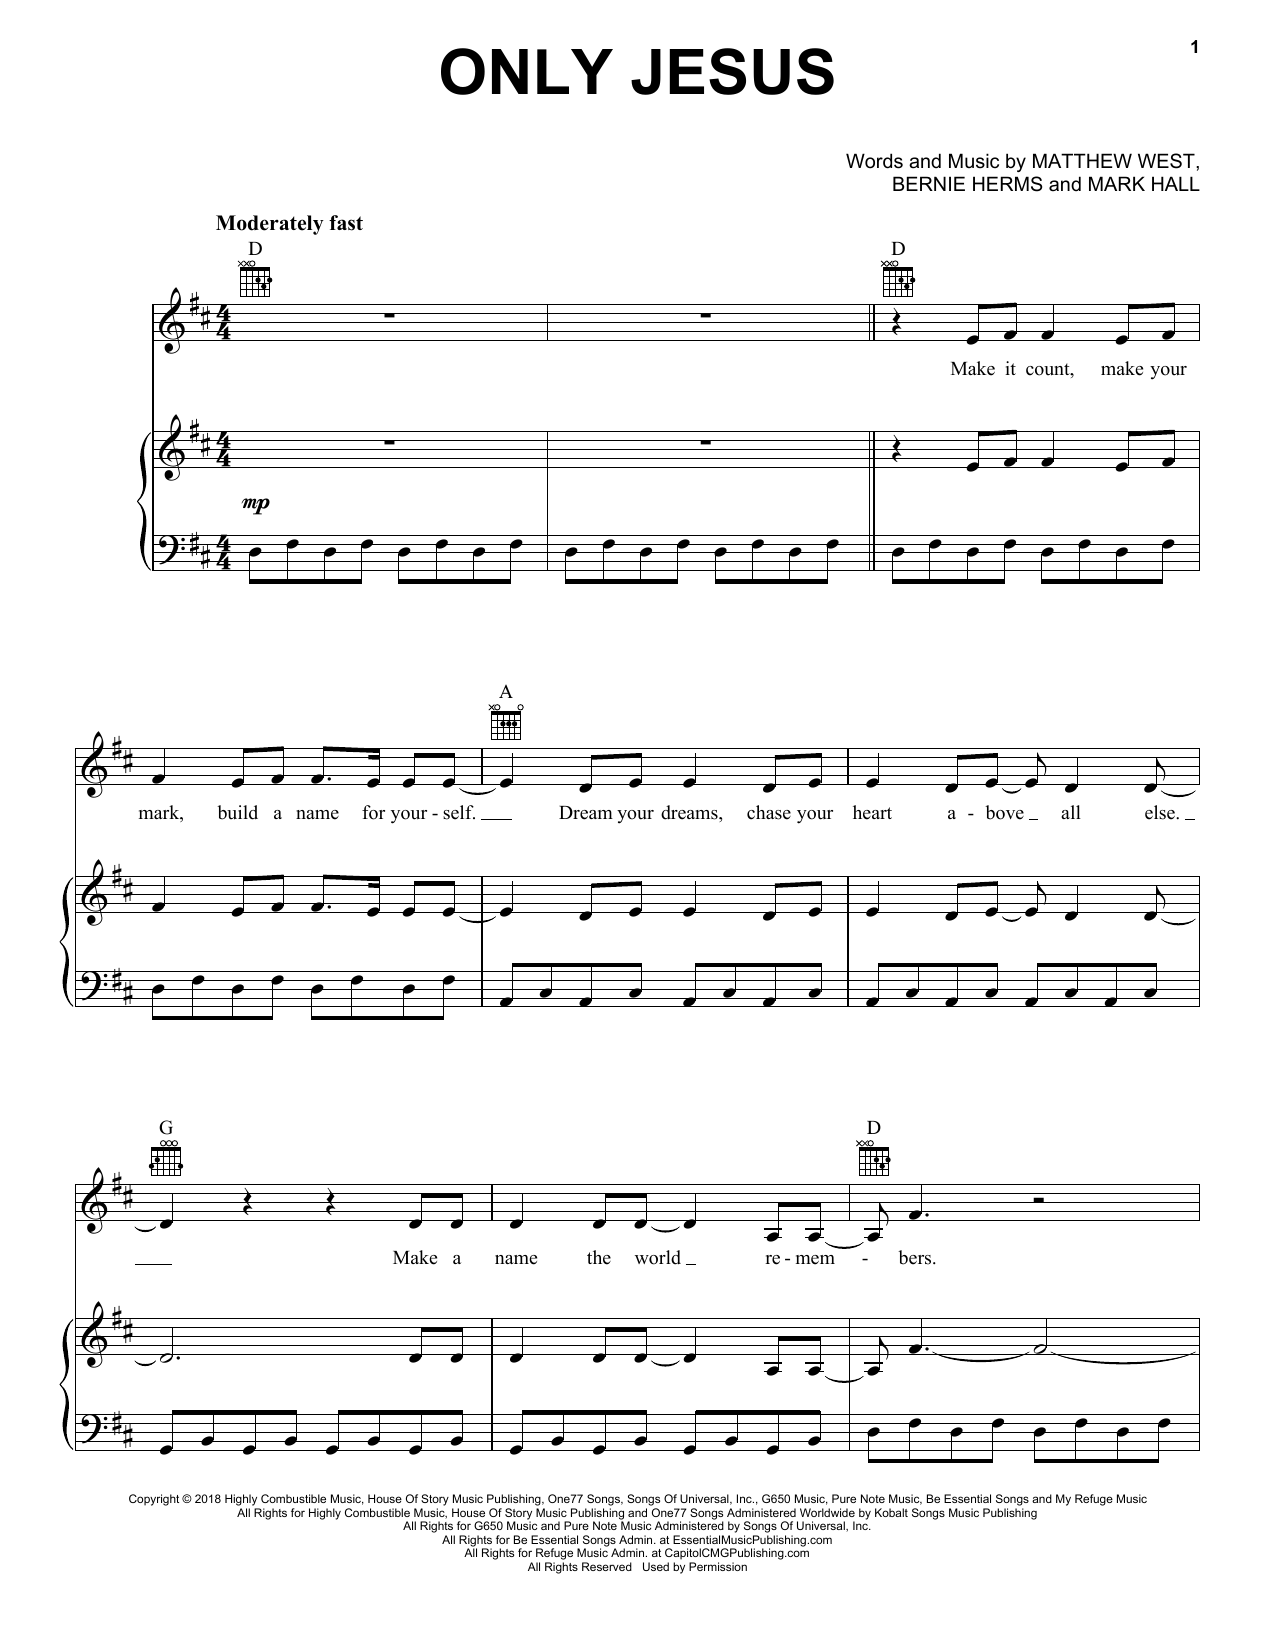 Download Casting Crowns Only Jesus Sheet Music